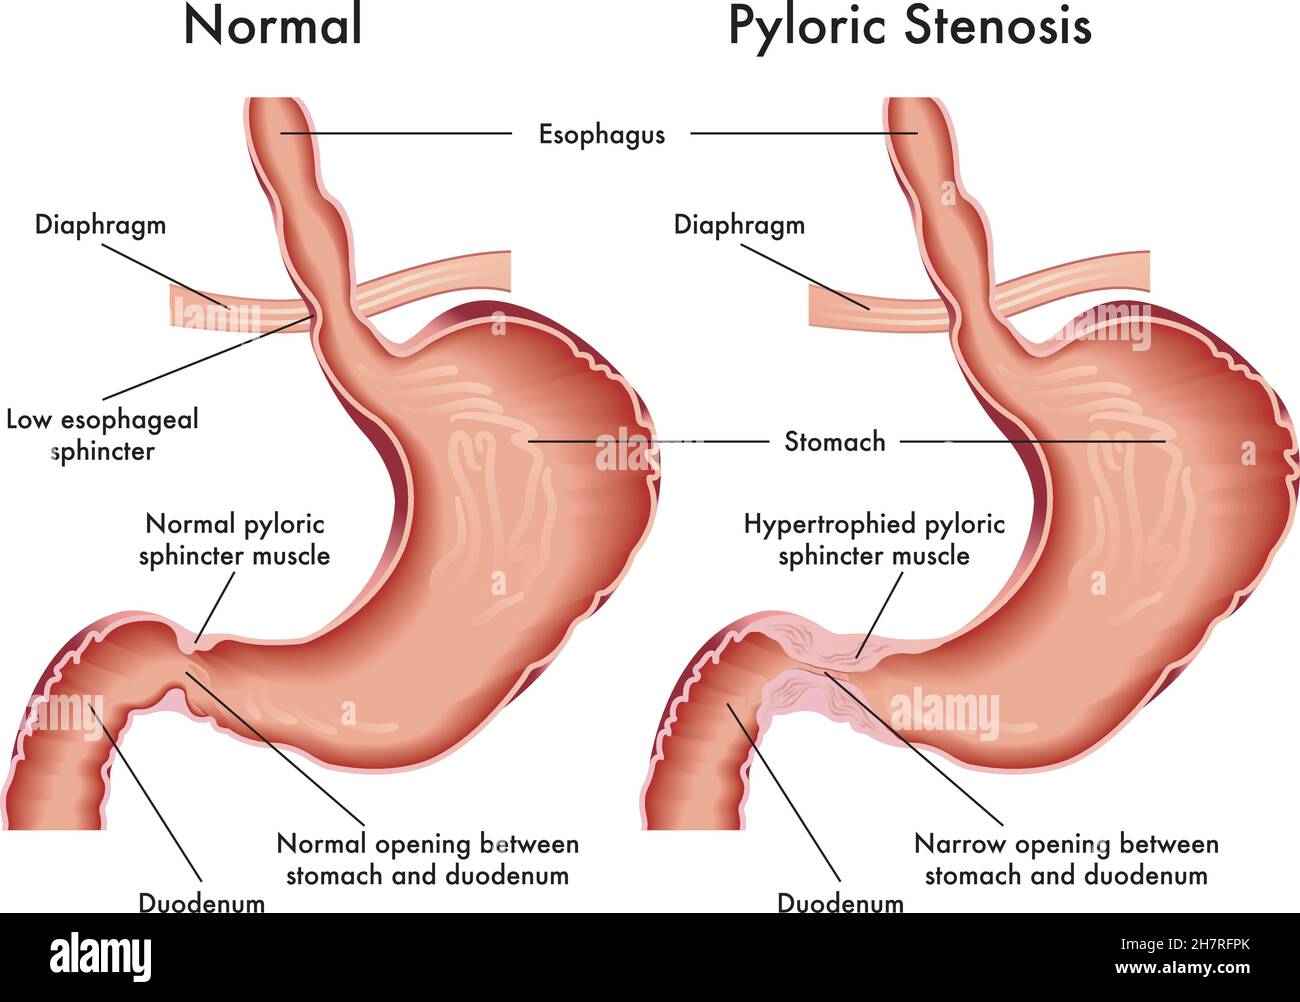 Medical illustration of symptoms of pyloric stenosis. Stock Vector